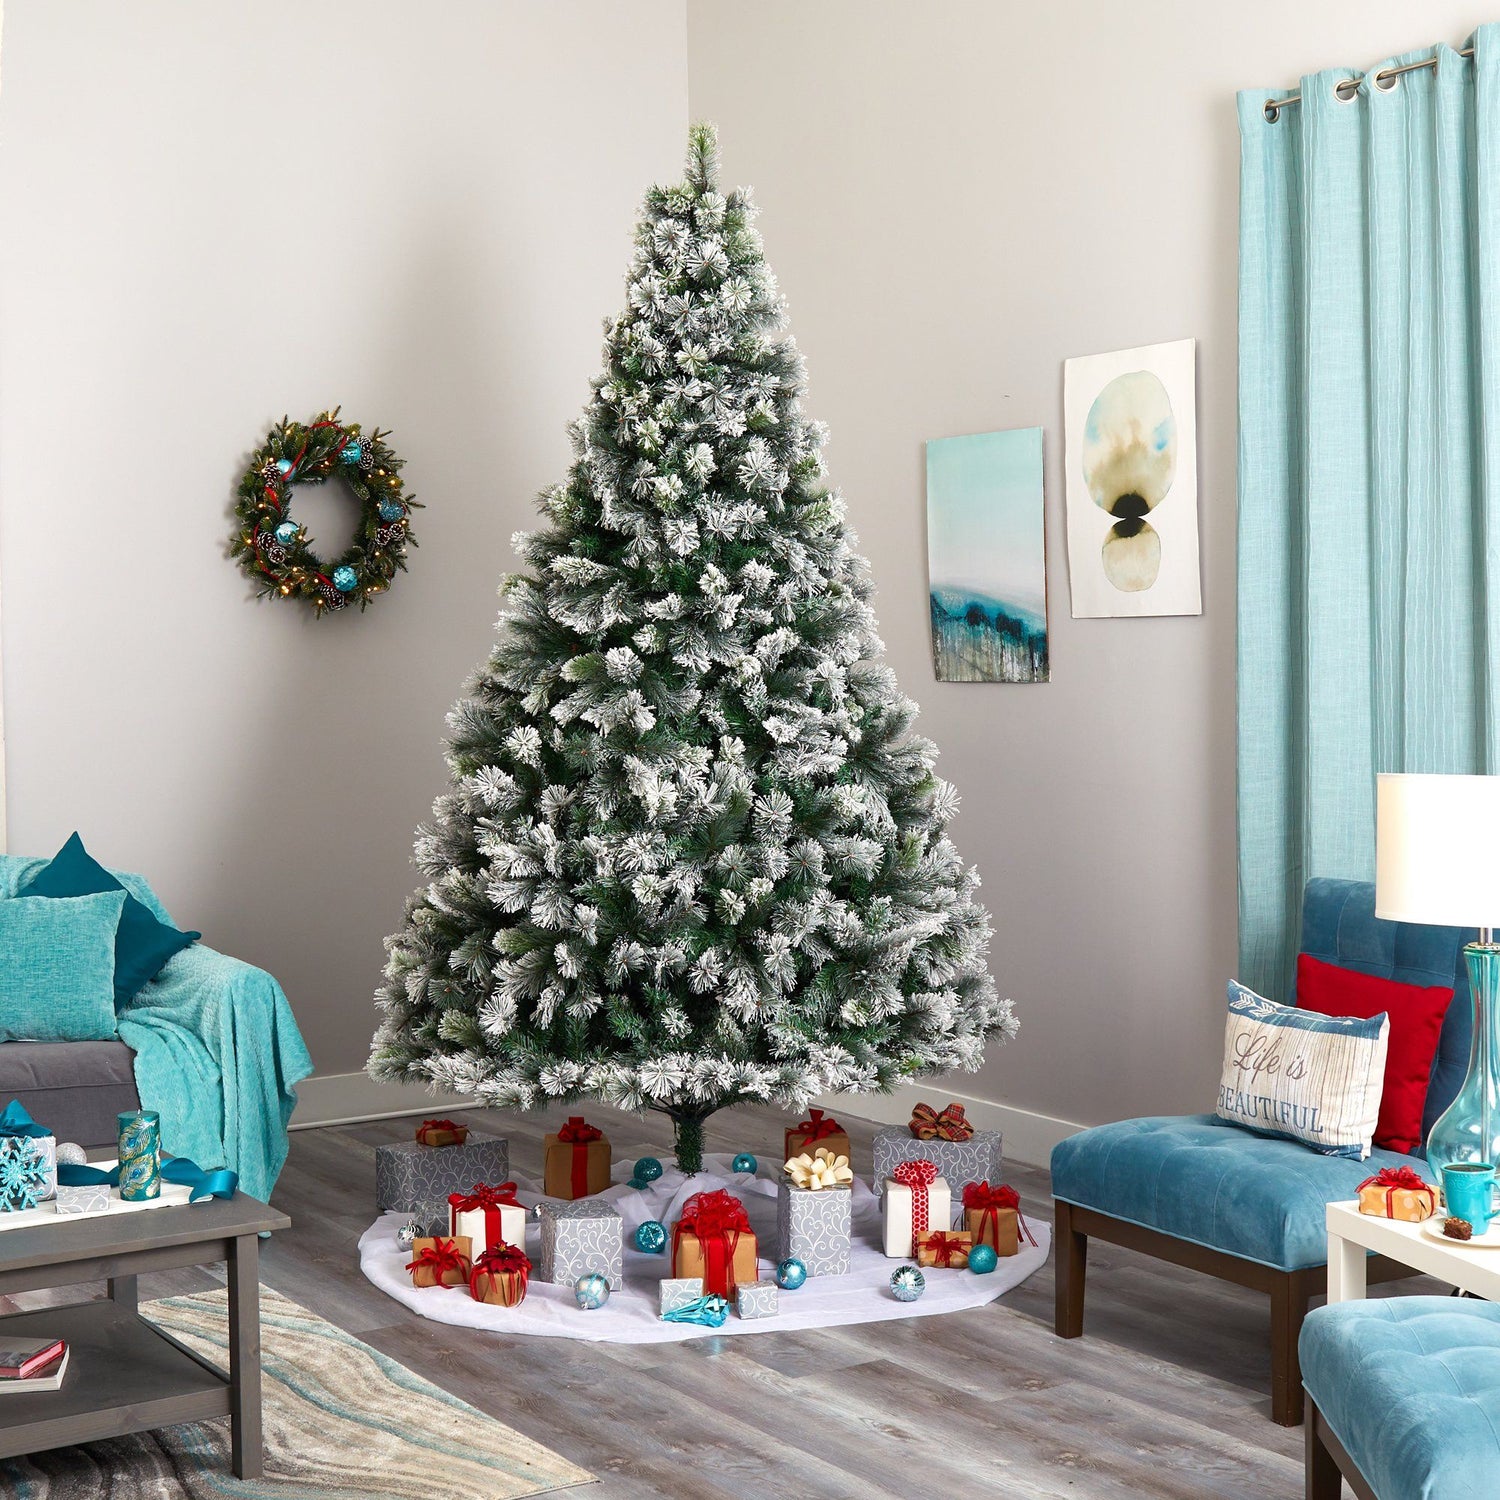 https://cdn.shopify.com/s/files/1/0108/9460/6436/products/artificial-9-flocked-oregon-pine-artificial-christmas-tree-with-600-clear-lights-and-1580-bendable-branches-nearly-natural-202751.jpg?v=1600809781&width=1500